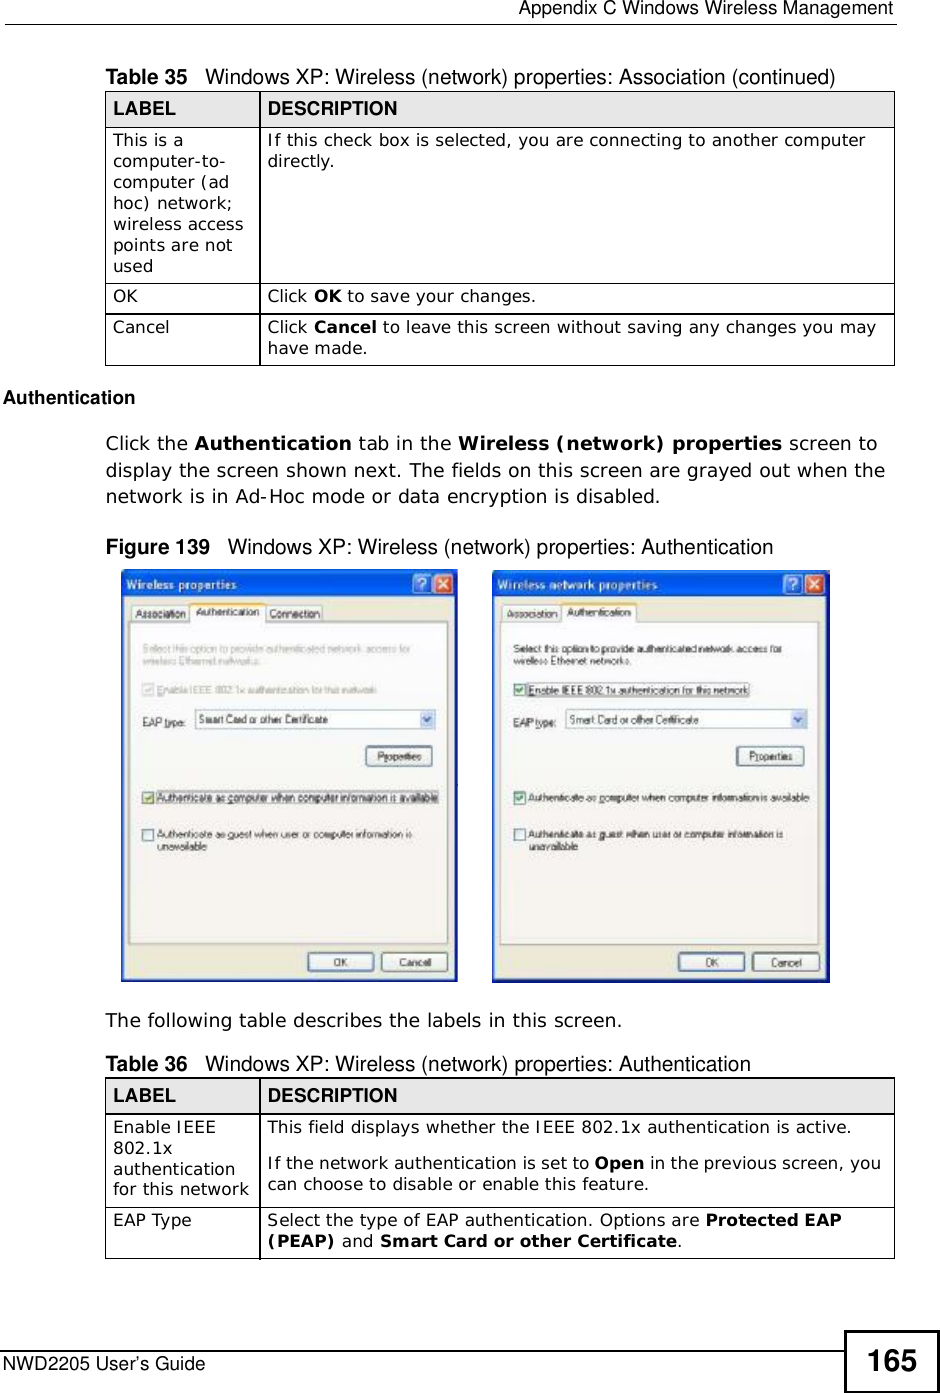  Appendix CWindows Wireless ManagementNWD2205 User’s Guide 165AuthenticationClick the Authentication tab in the Wireless (network) properties screen to display the screen shown next. The fields on this screen are grayed out when the network is in Ad-Hoc mode or data encryption is disabled.Figure 139   Windows XP: Wireless (network) properties: AuthenticationThe following table describes the labels in this screen.This is a computer-to-computer (ad hoc) network; wireless access points are not usedIf this check box is selected, you are connecting to another computer directly.OKClick OK to save your changes.CancelClick Cancel to leave this screen without saving any changes you may have made.Table 35   Windows XP: Wireless (network) properties: Association (continued)LABEL DESCRIPTIONTable 36   Windows XP: Wireless (network) properties: AuthenticationLABEL DESCRIPTIONEnable IEEE 802.1x authentication for this networkThis field displays whether the IEEE 802.1x authentication is active.If the network authentication is set to Open in the previous screen, you can choose to disable or enable this feature.EAP TypeSelect the type of EAP authentication. Options are Protected EAP (PEAP) and Smart Card or other Certificate.